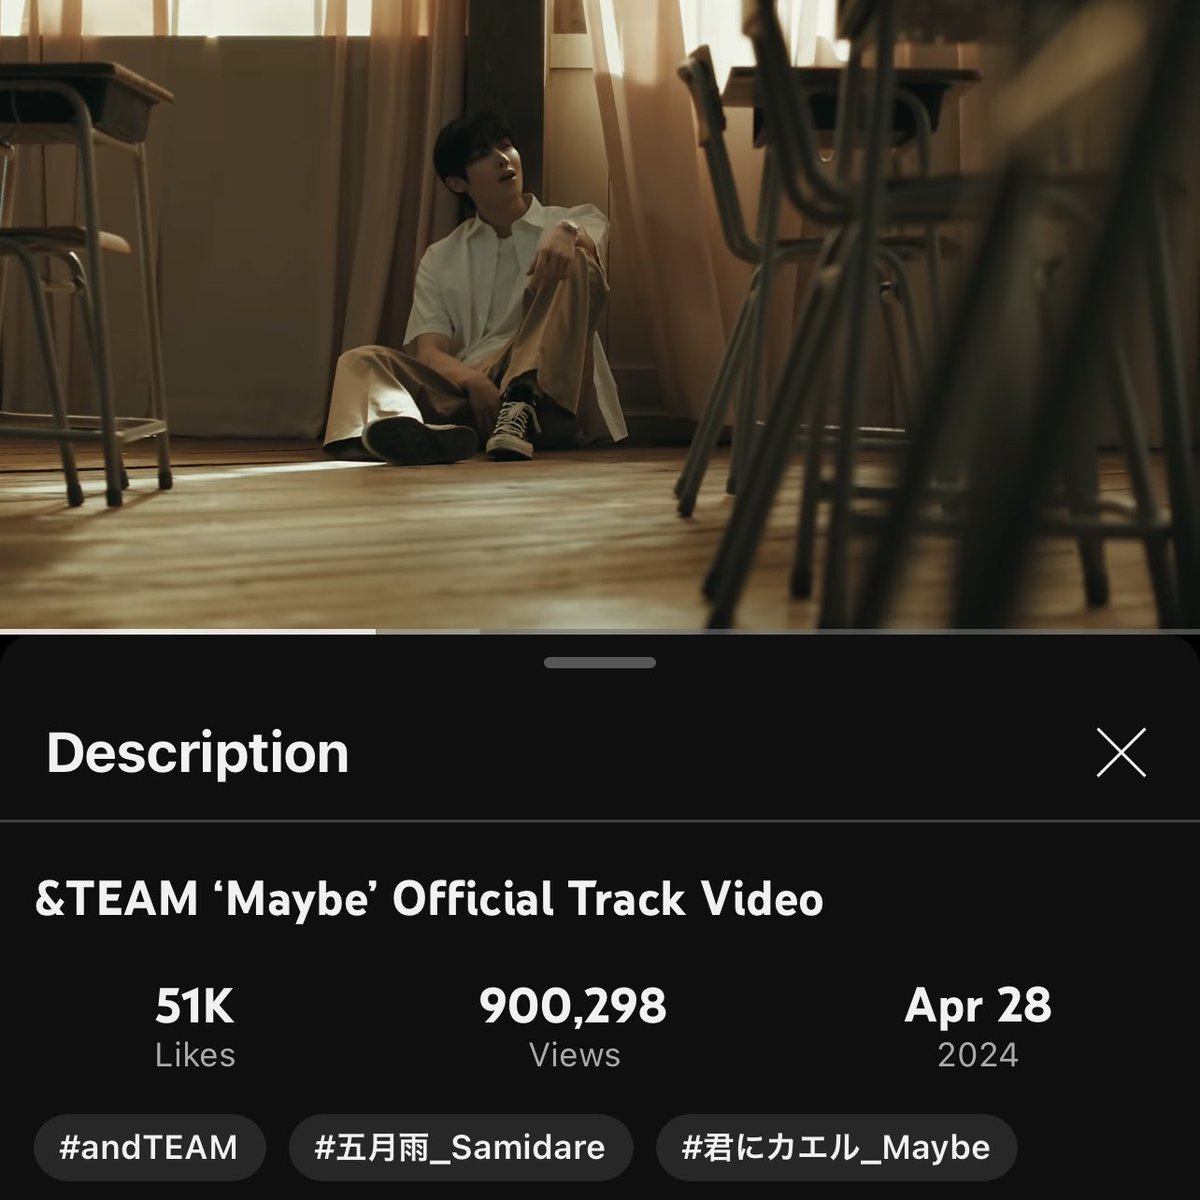 [YOUTUBE] 240501 &TEAM 'Maybe Official MV” has surpassed 900,000 views with 51K likes on YouTube. •Please share the MV link! •Please leave a like from all accounts! ▶️youtu.be/vr5HnAjZSqA 🎯 2M in 1 Week! #君にカエル_Maybe #andTEAM